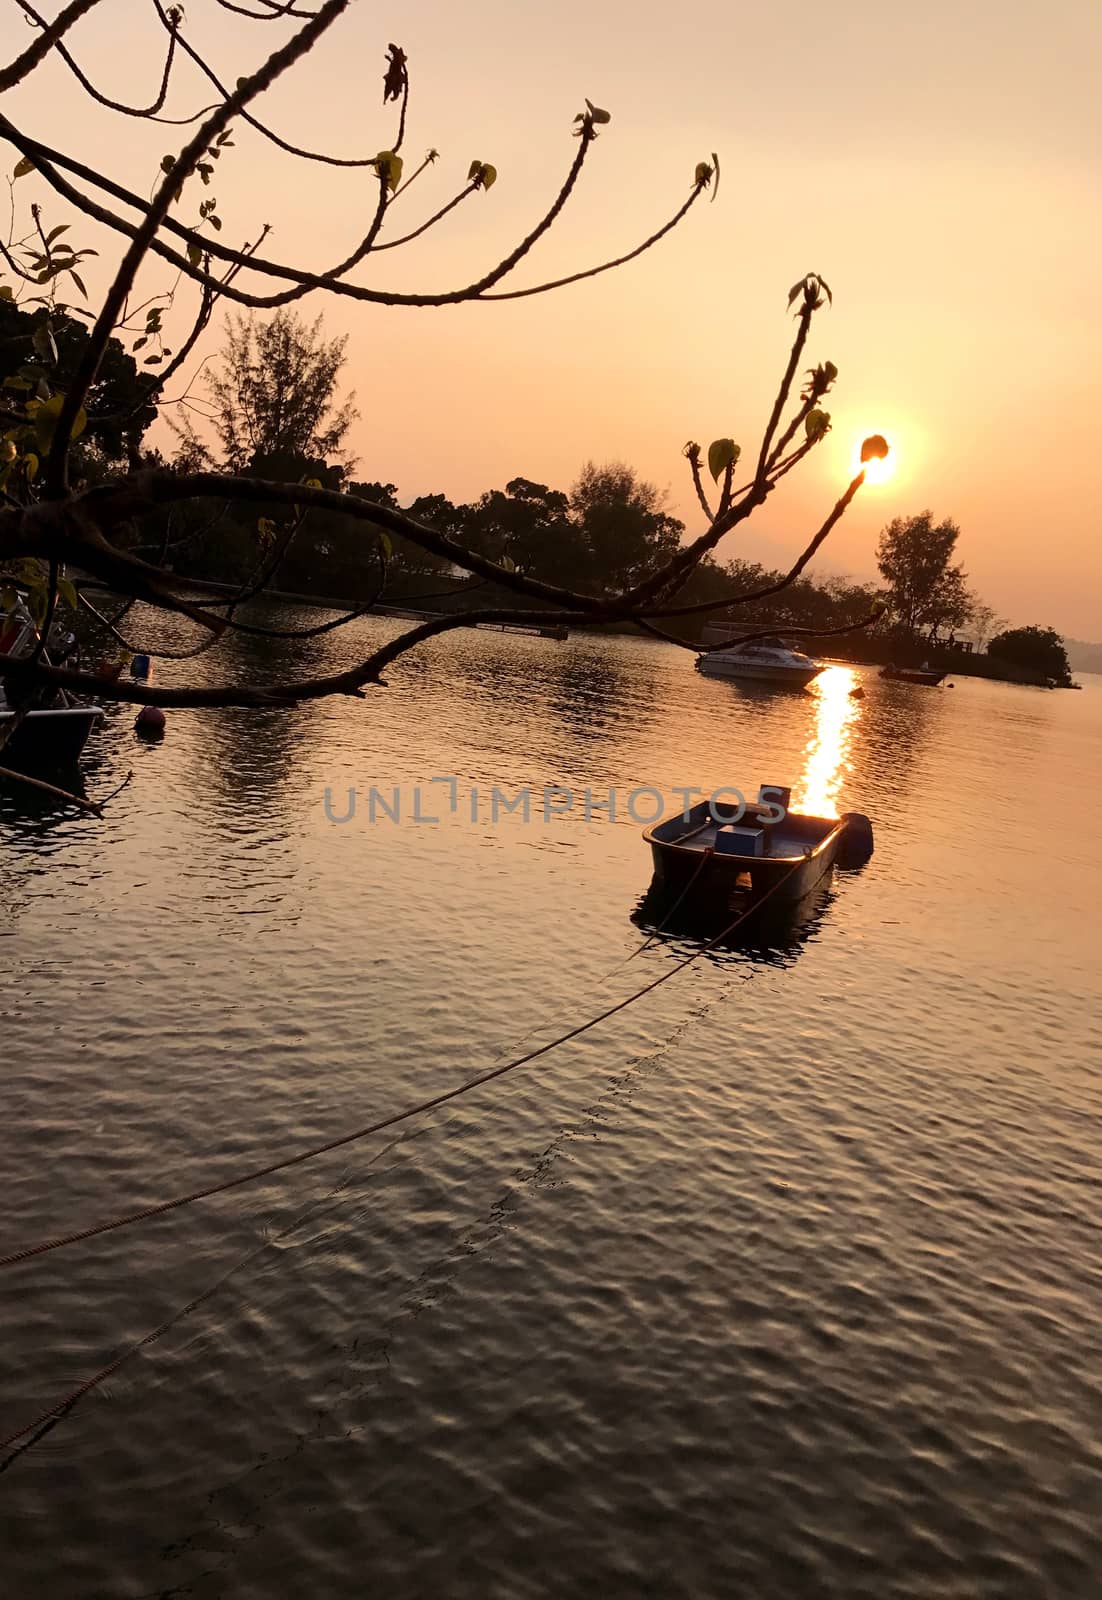 Sun, tree and fishing boat on the lake at sunset